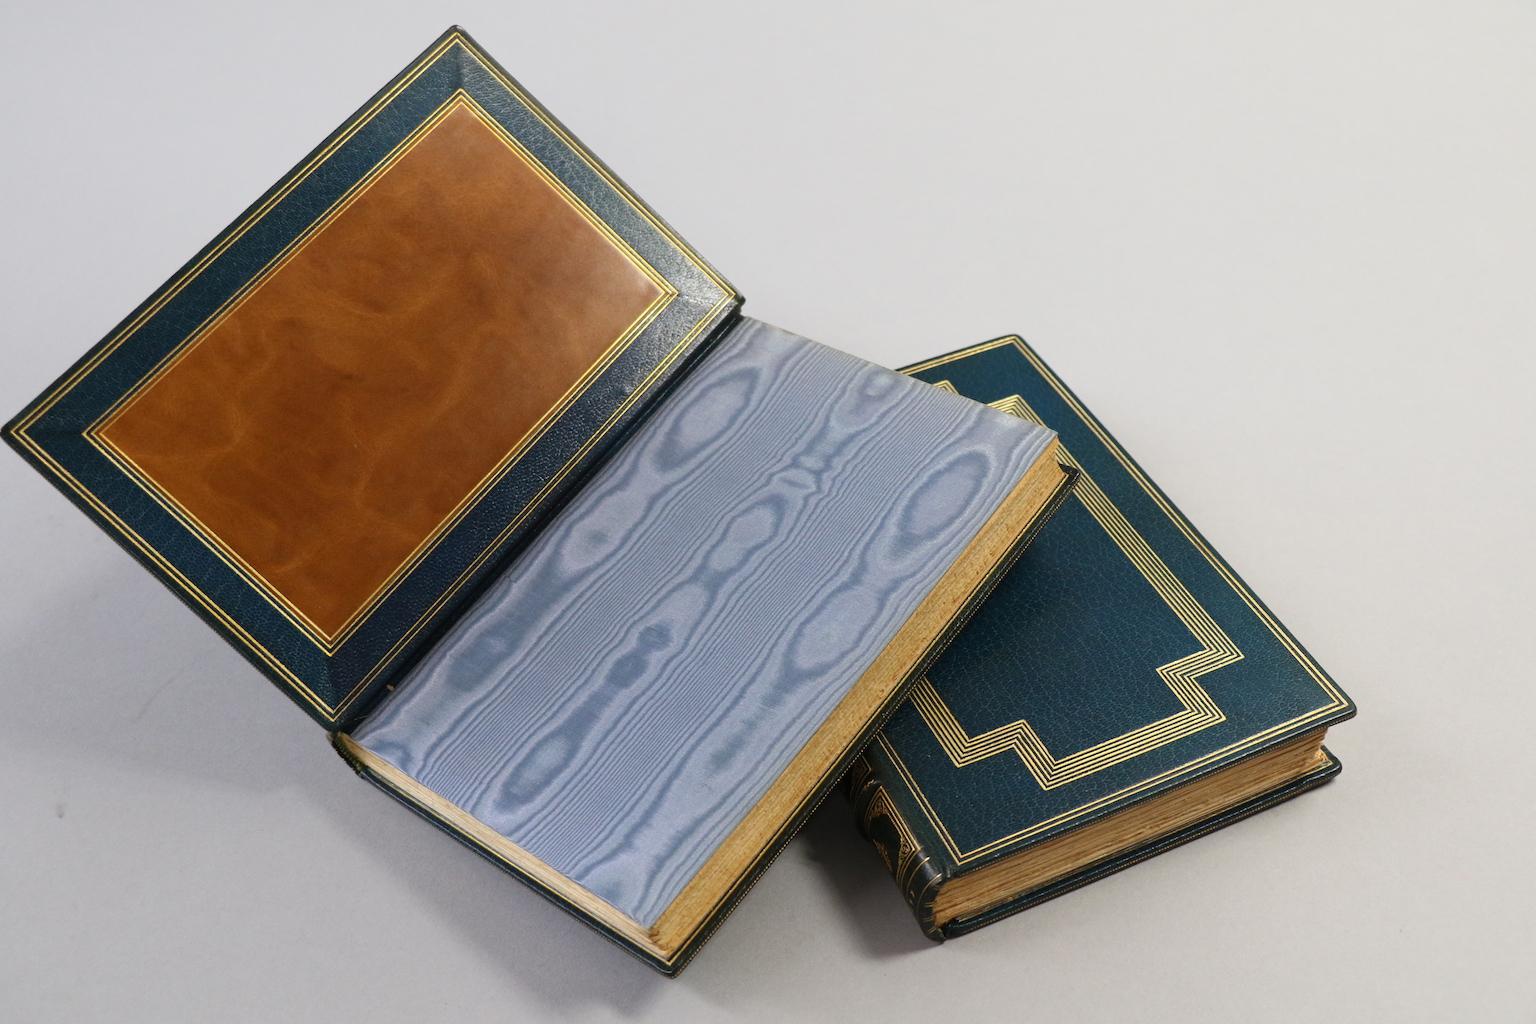 32 volumes. Limited to 204 copies of which this is #160, printed on Japan paper. Bound in full blue Morocco with blue silk & brown Morocco doublunes. By Stikeman & Son, top edges gilt, raised bands, gilt on covers & spines. Published in New York in